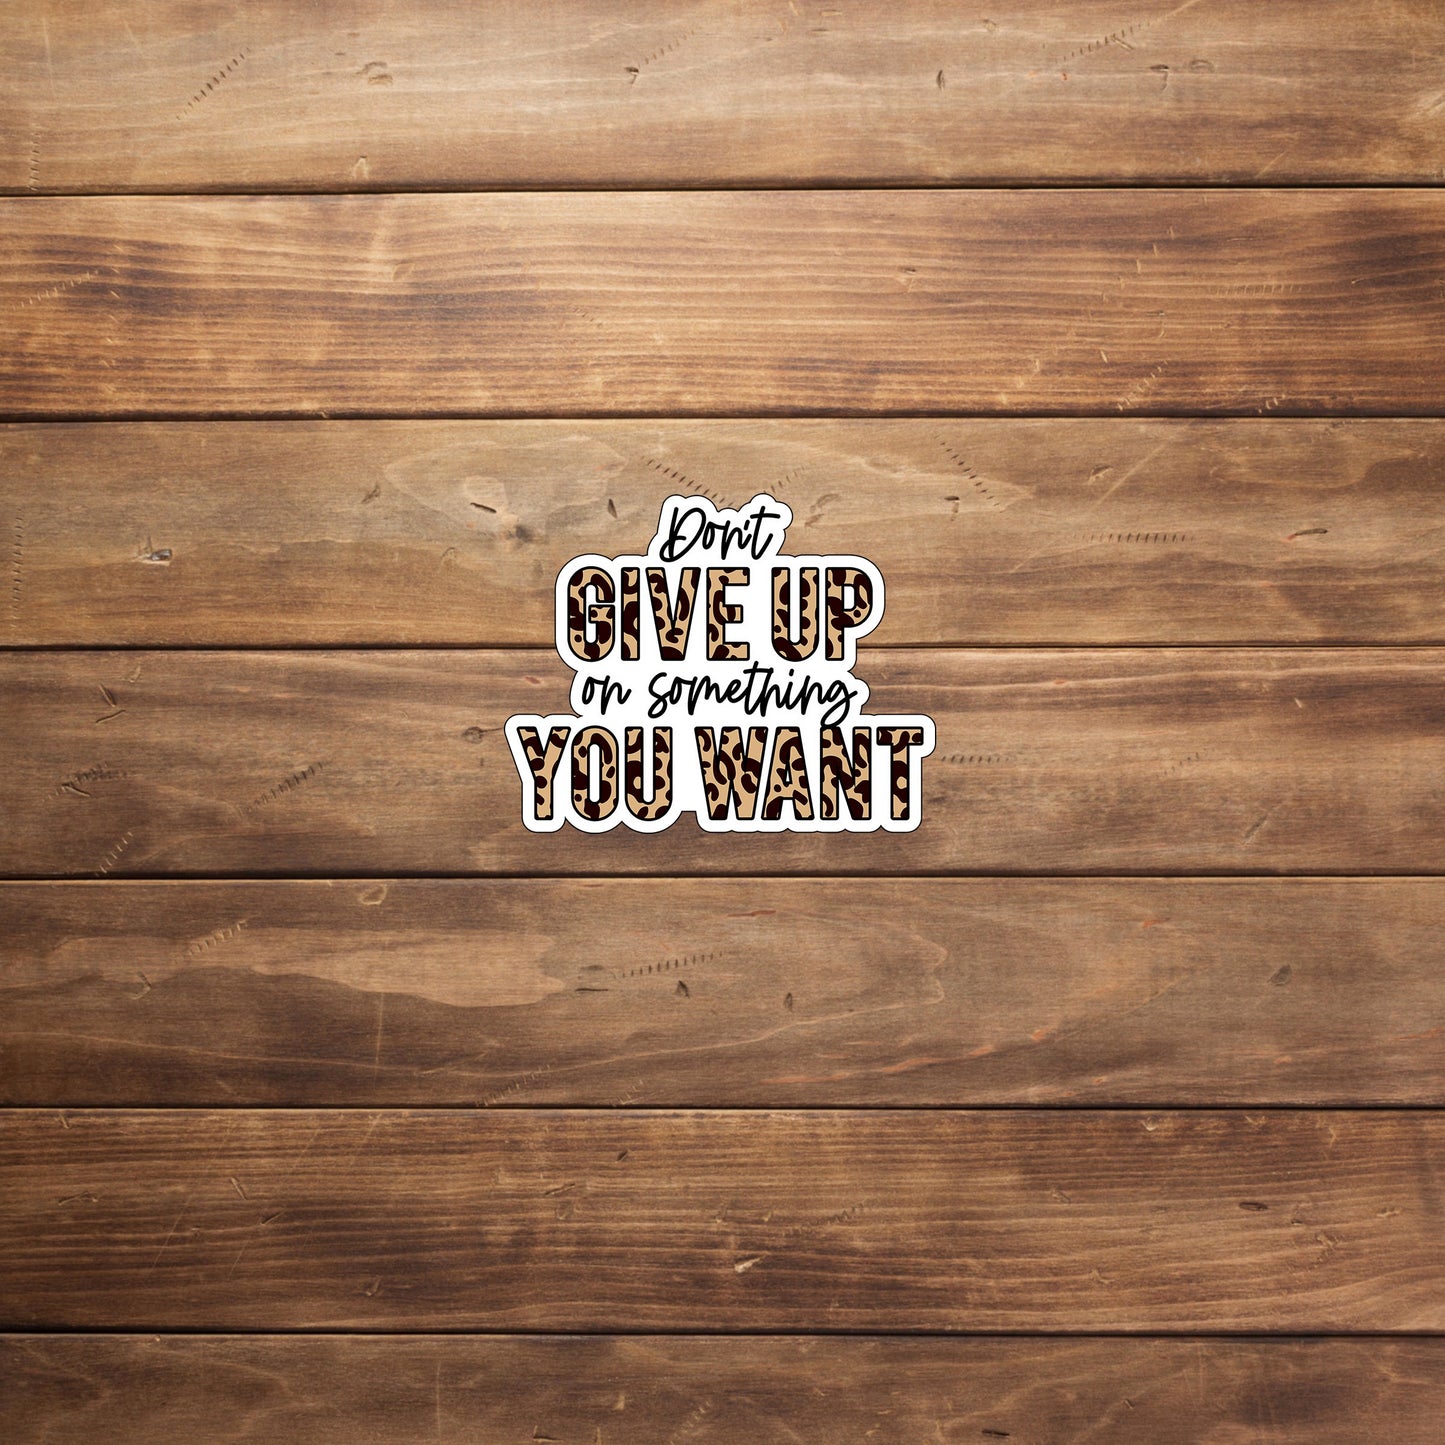 Don't give up on something you want  Sticker,  Vinyl sticker, laptop sticker, Tablet sticker